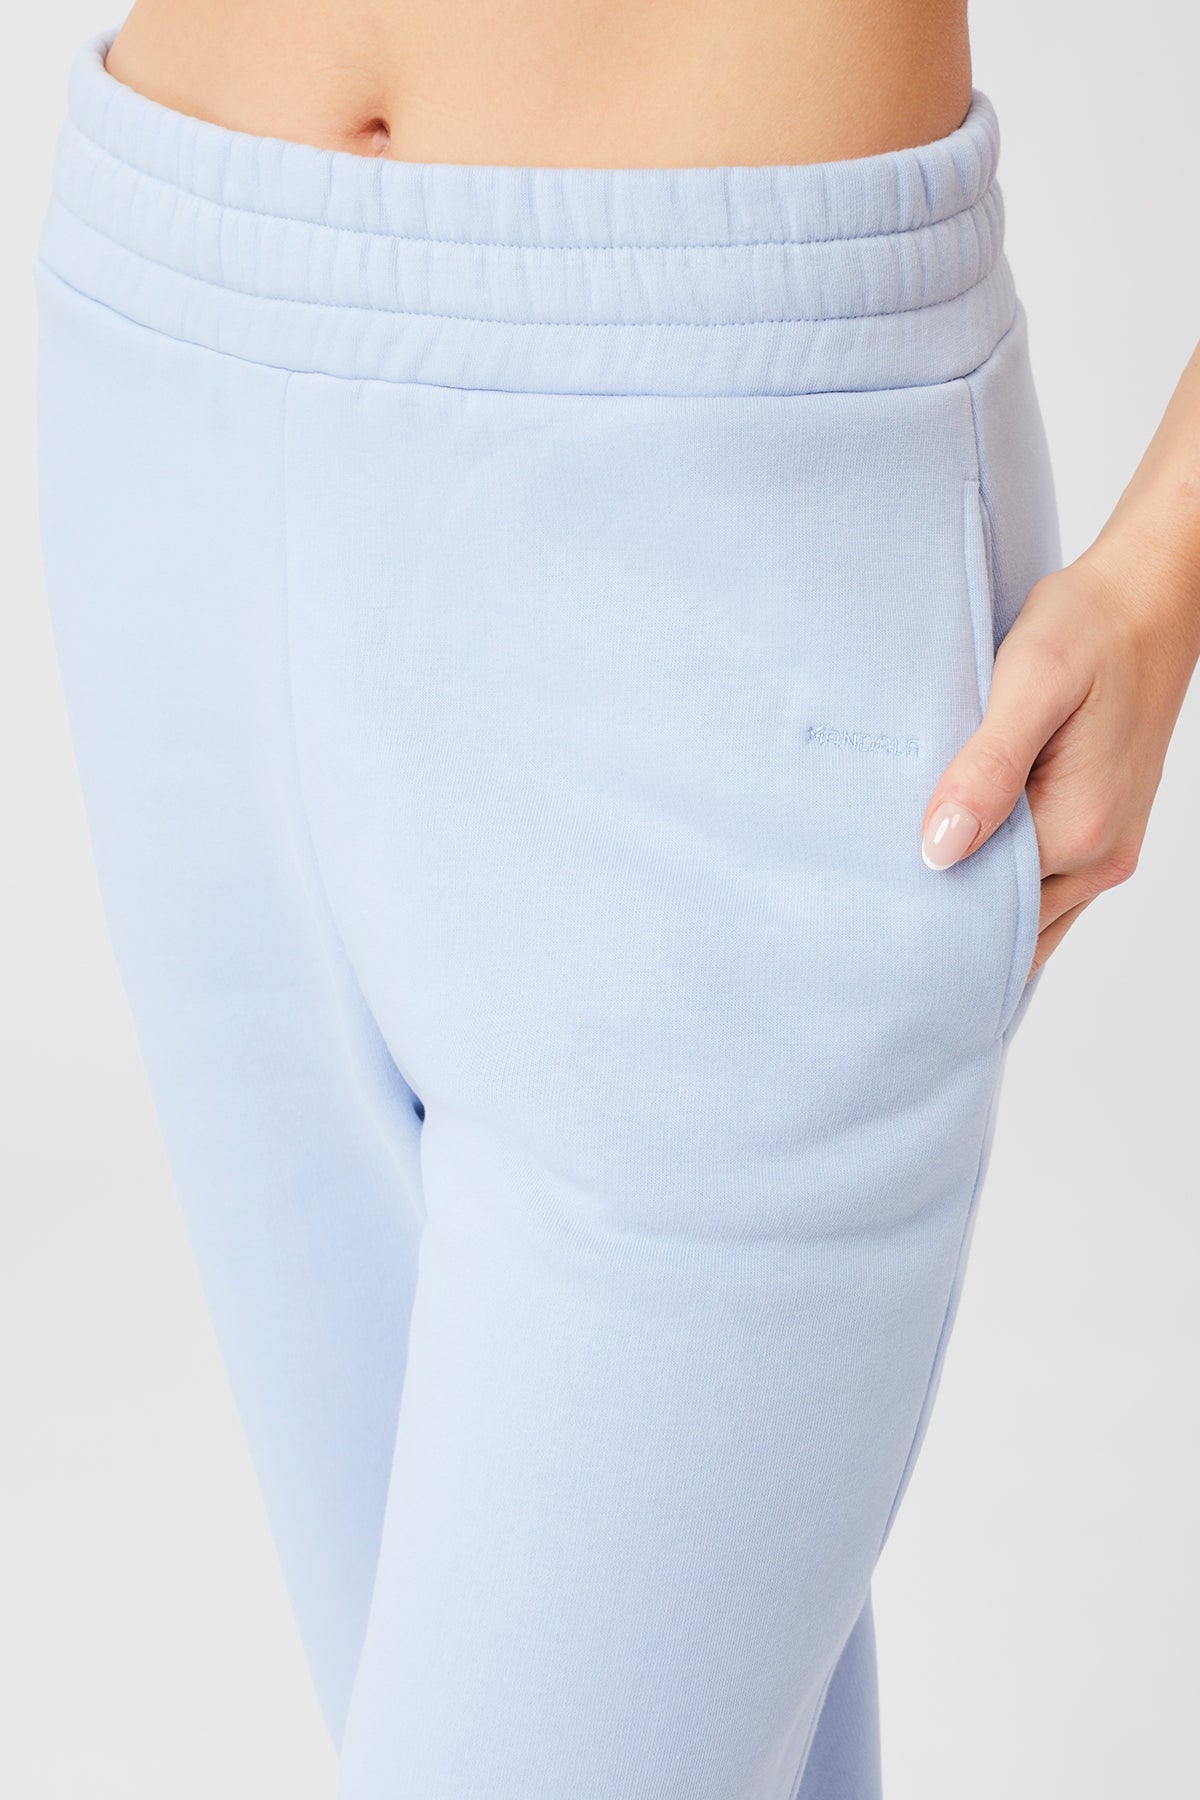 Mandala Natural Dye Track Pants for women in the color Sky Blue